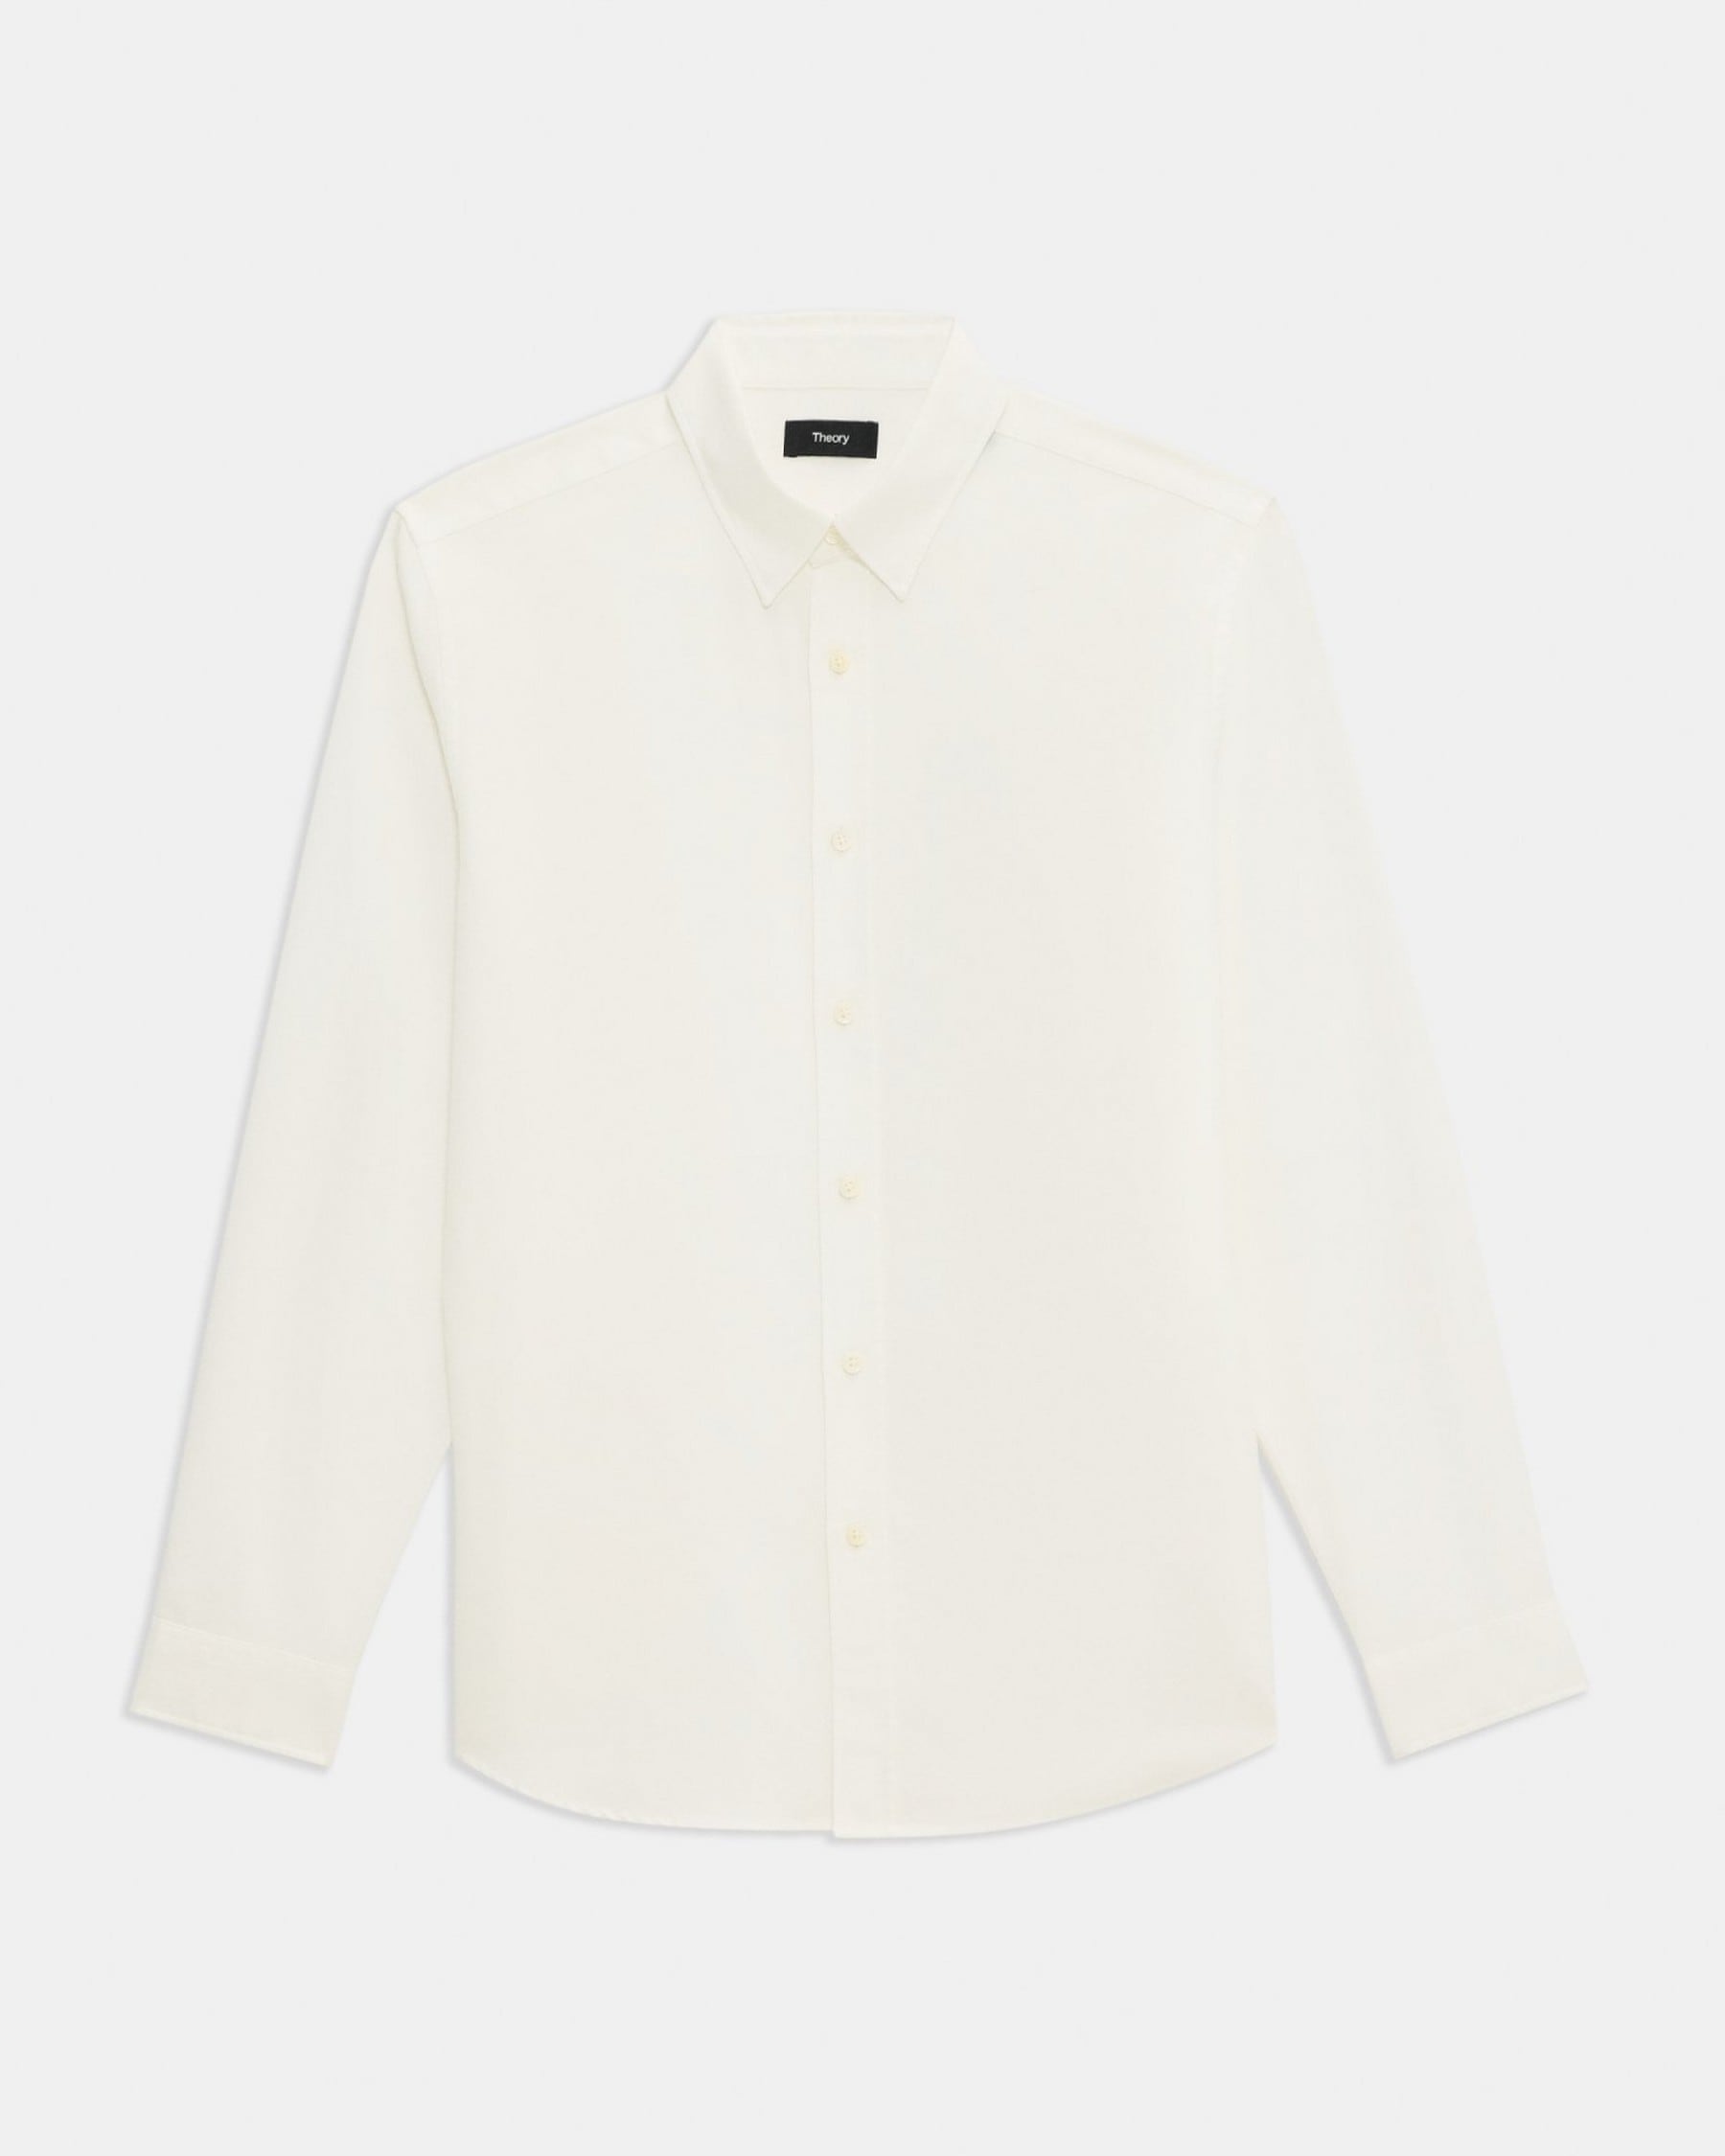 Irving Shirt in Oxford Cotton